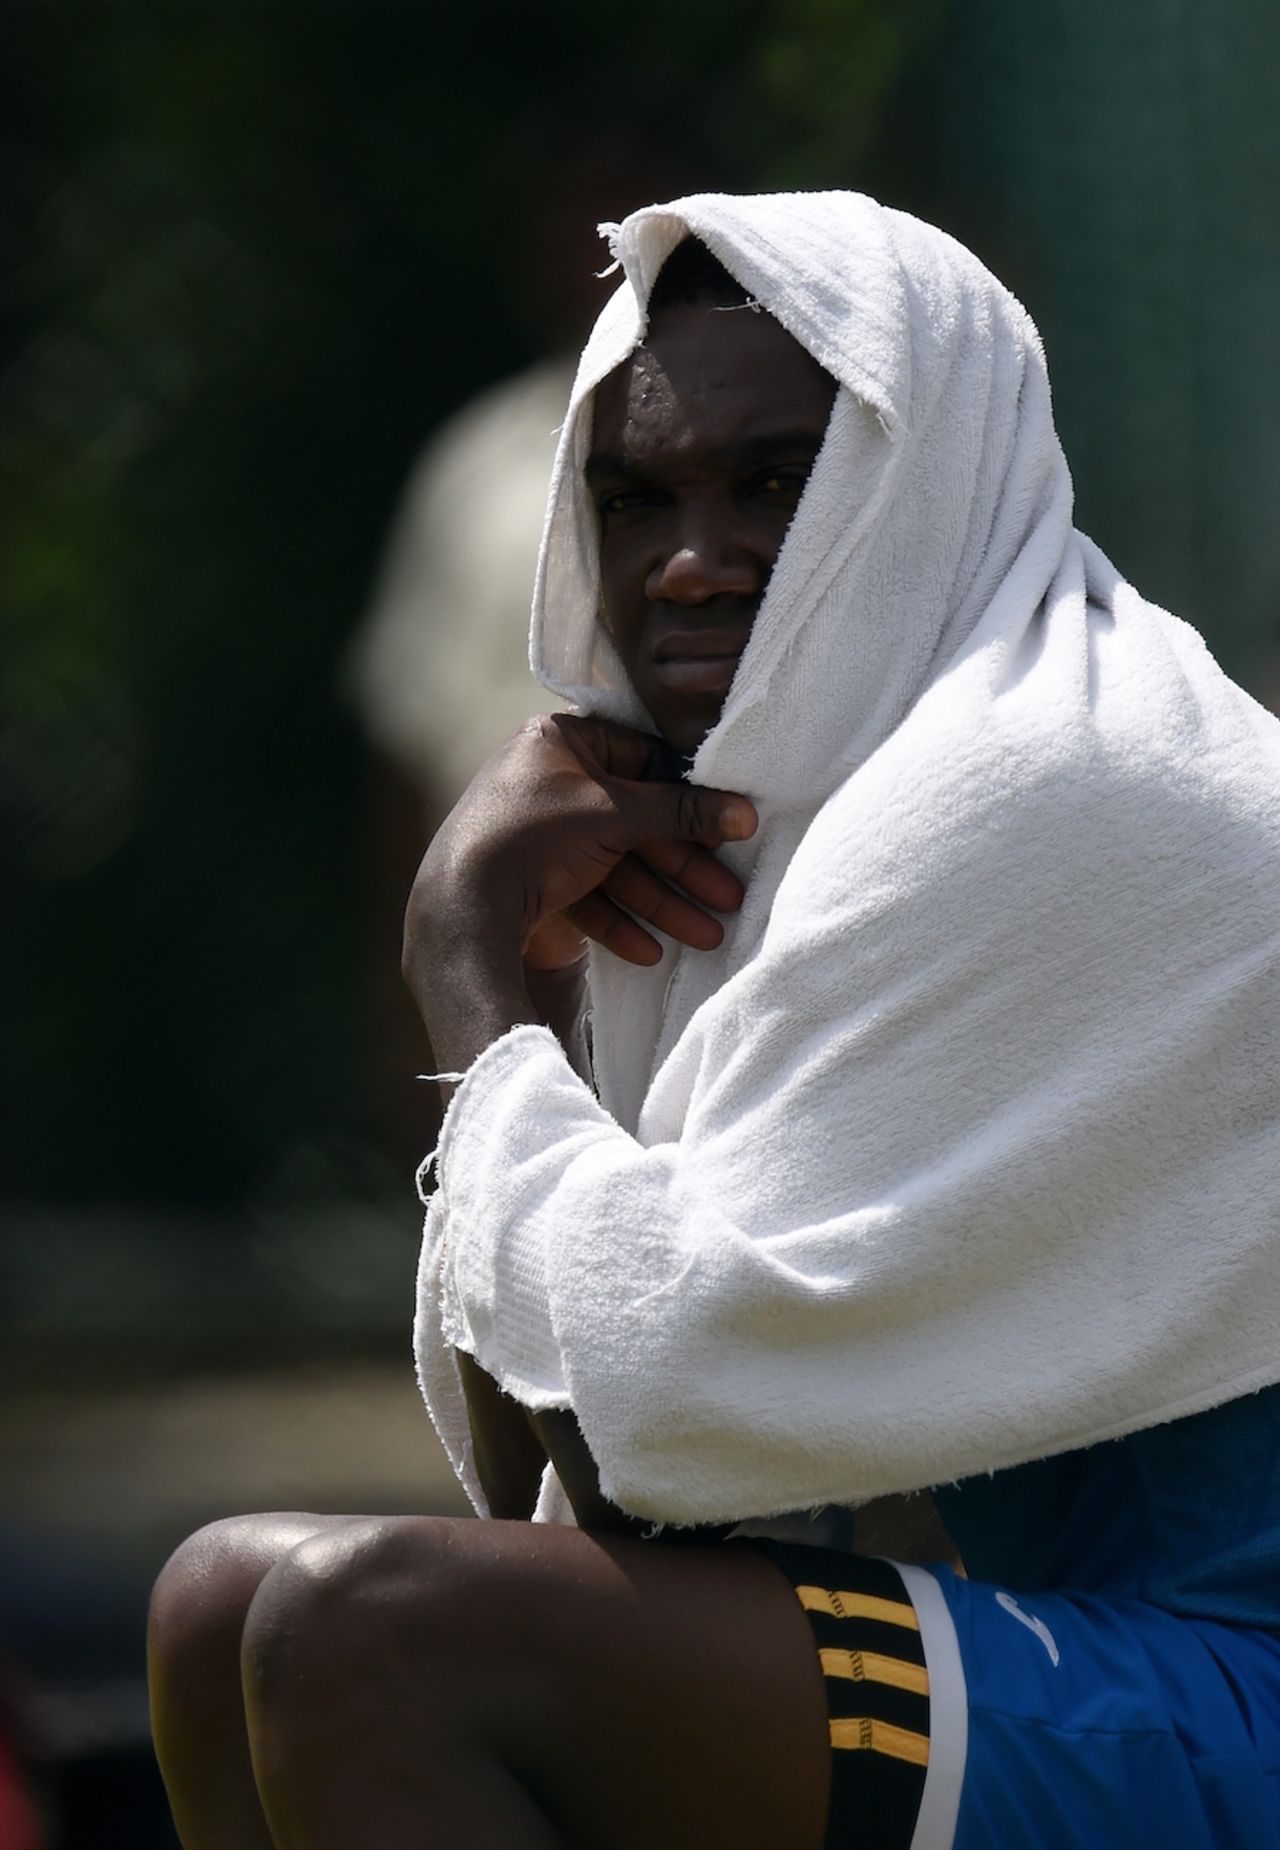 Jerome Taylor takes cools off during a practice session, Pallekele, November 6, 2015